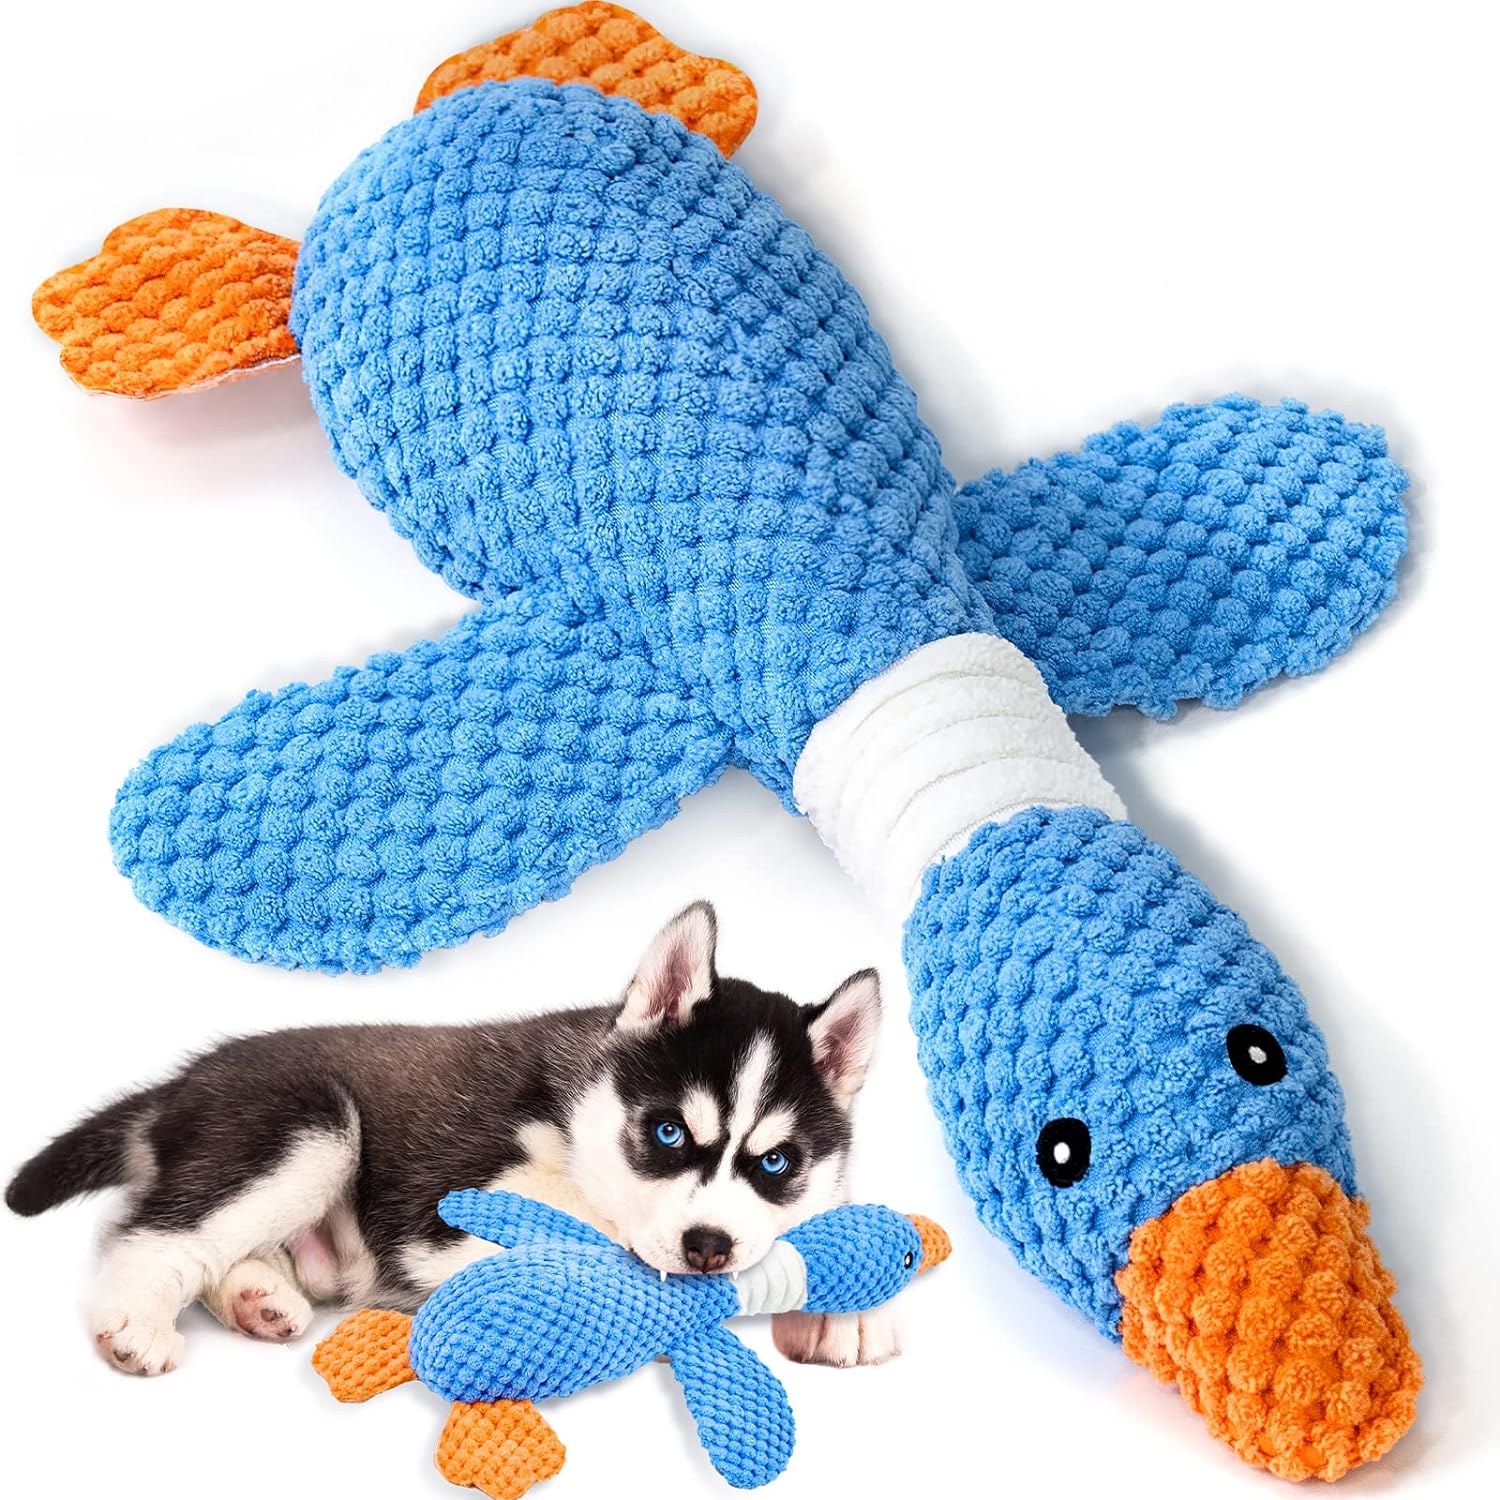 Vitscan Upgraded Goose Indestructible Dog Toys for Aggressive Chewers Small Medium Large Breed, Crinkle Squeaky Plush Dog Puppy Chew Toys for Teething, Duck Puppy Toys